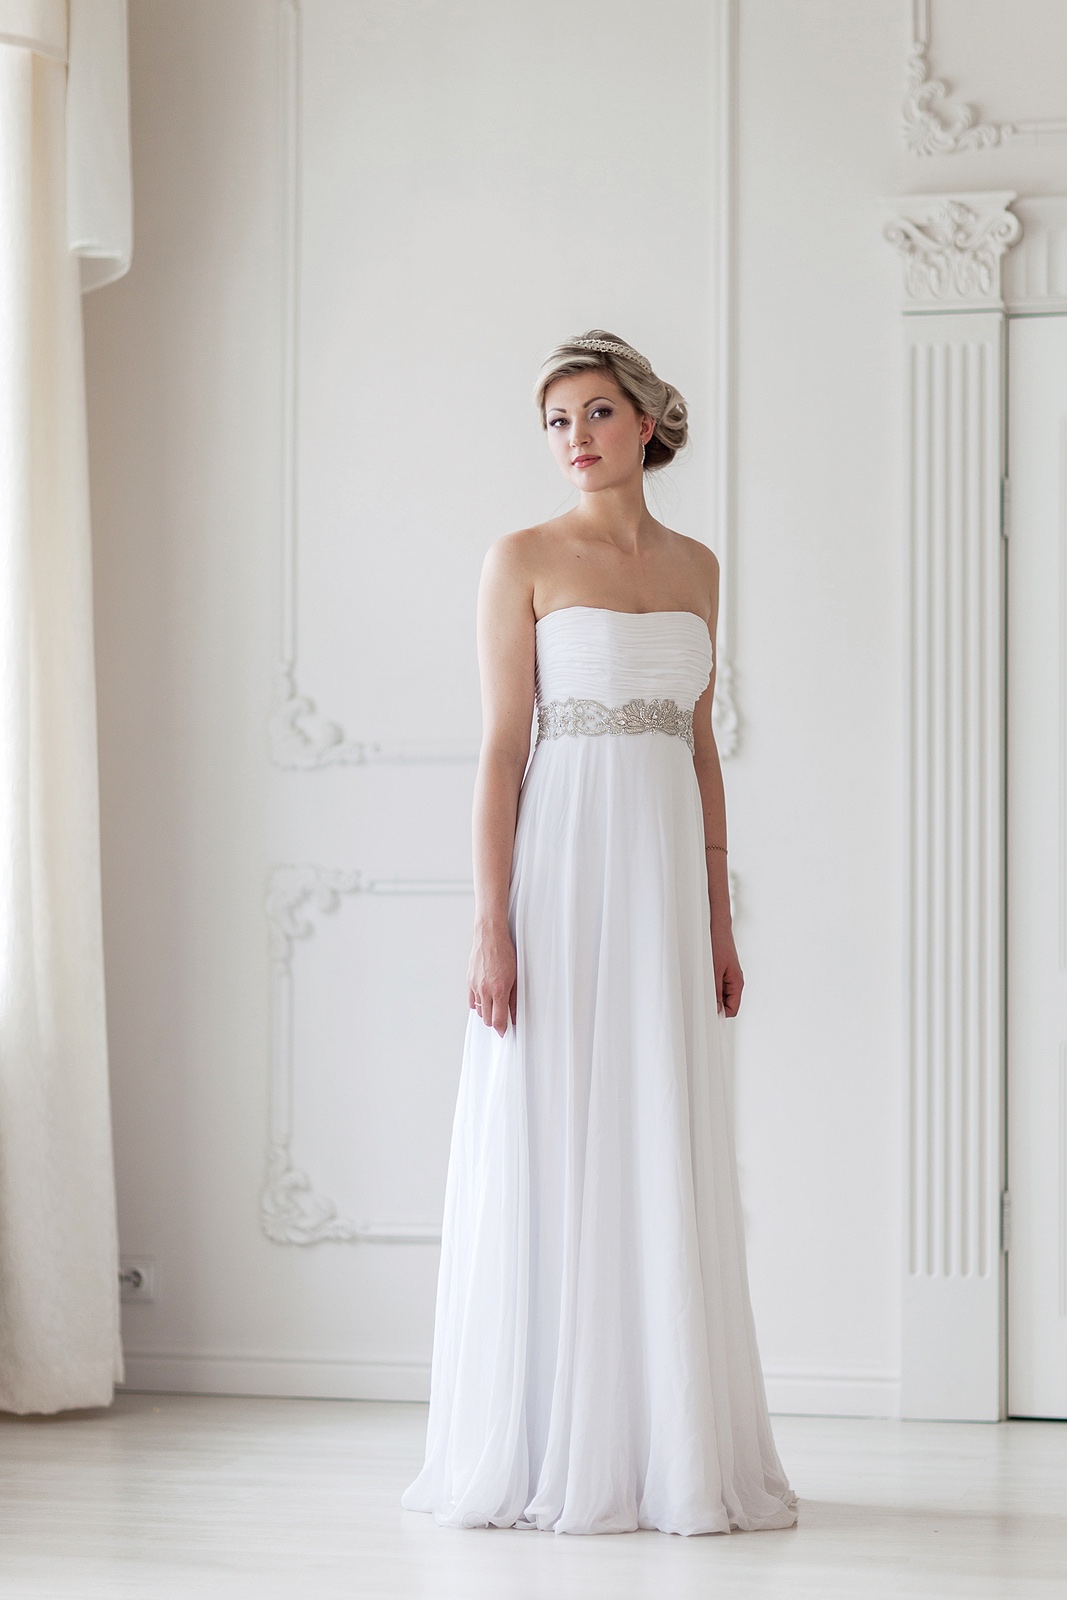 why-do-so-many-brides-opt-for-casual-wedding-dresses